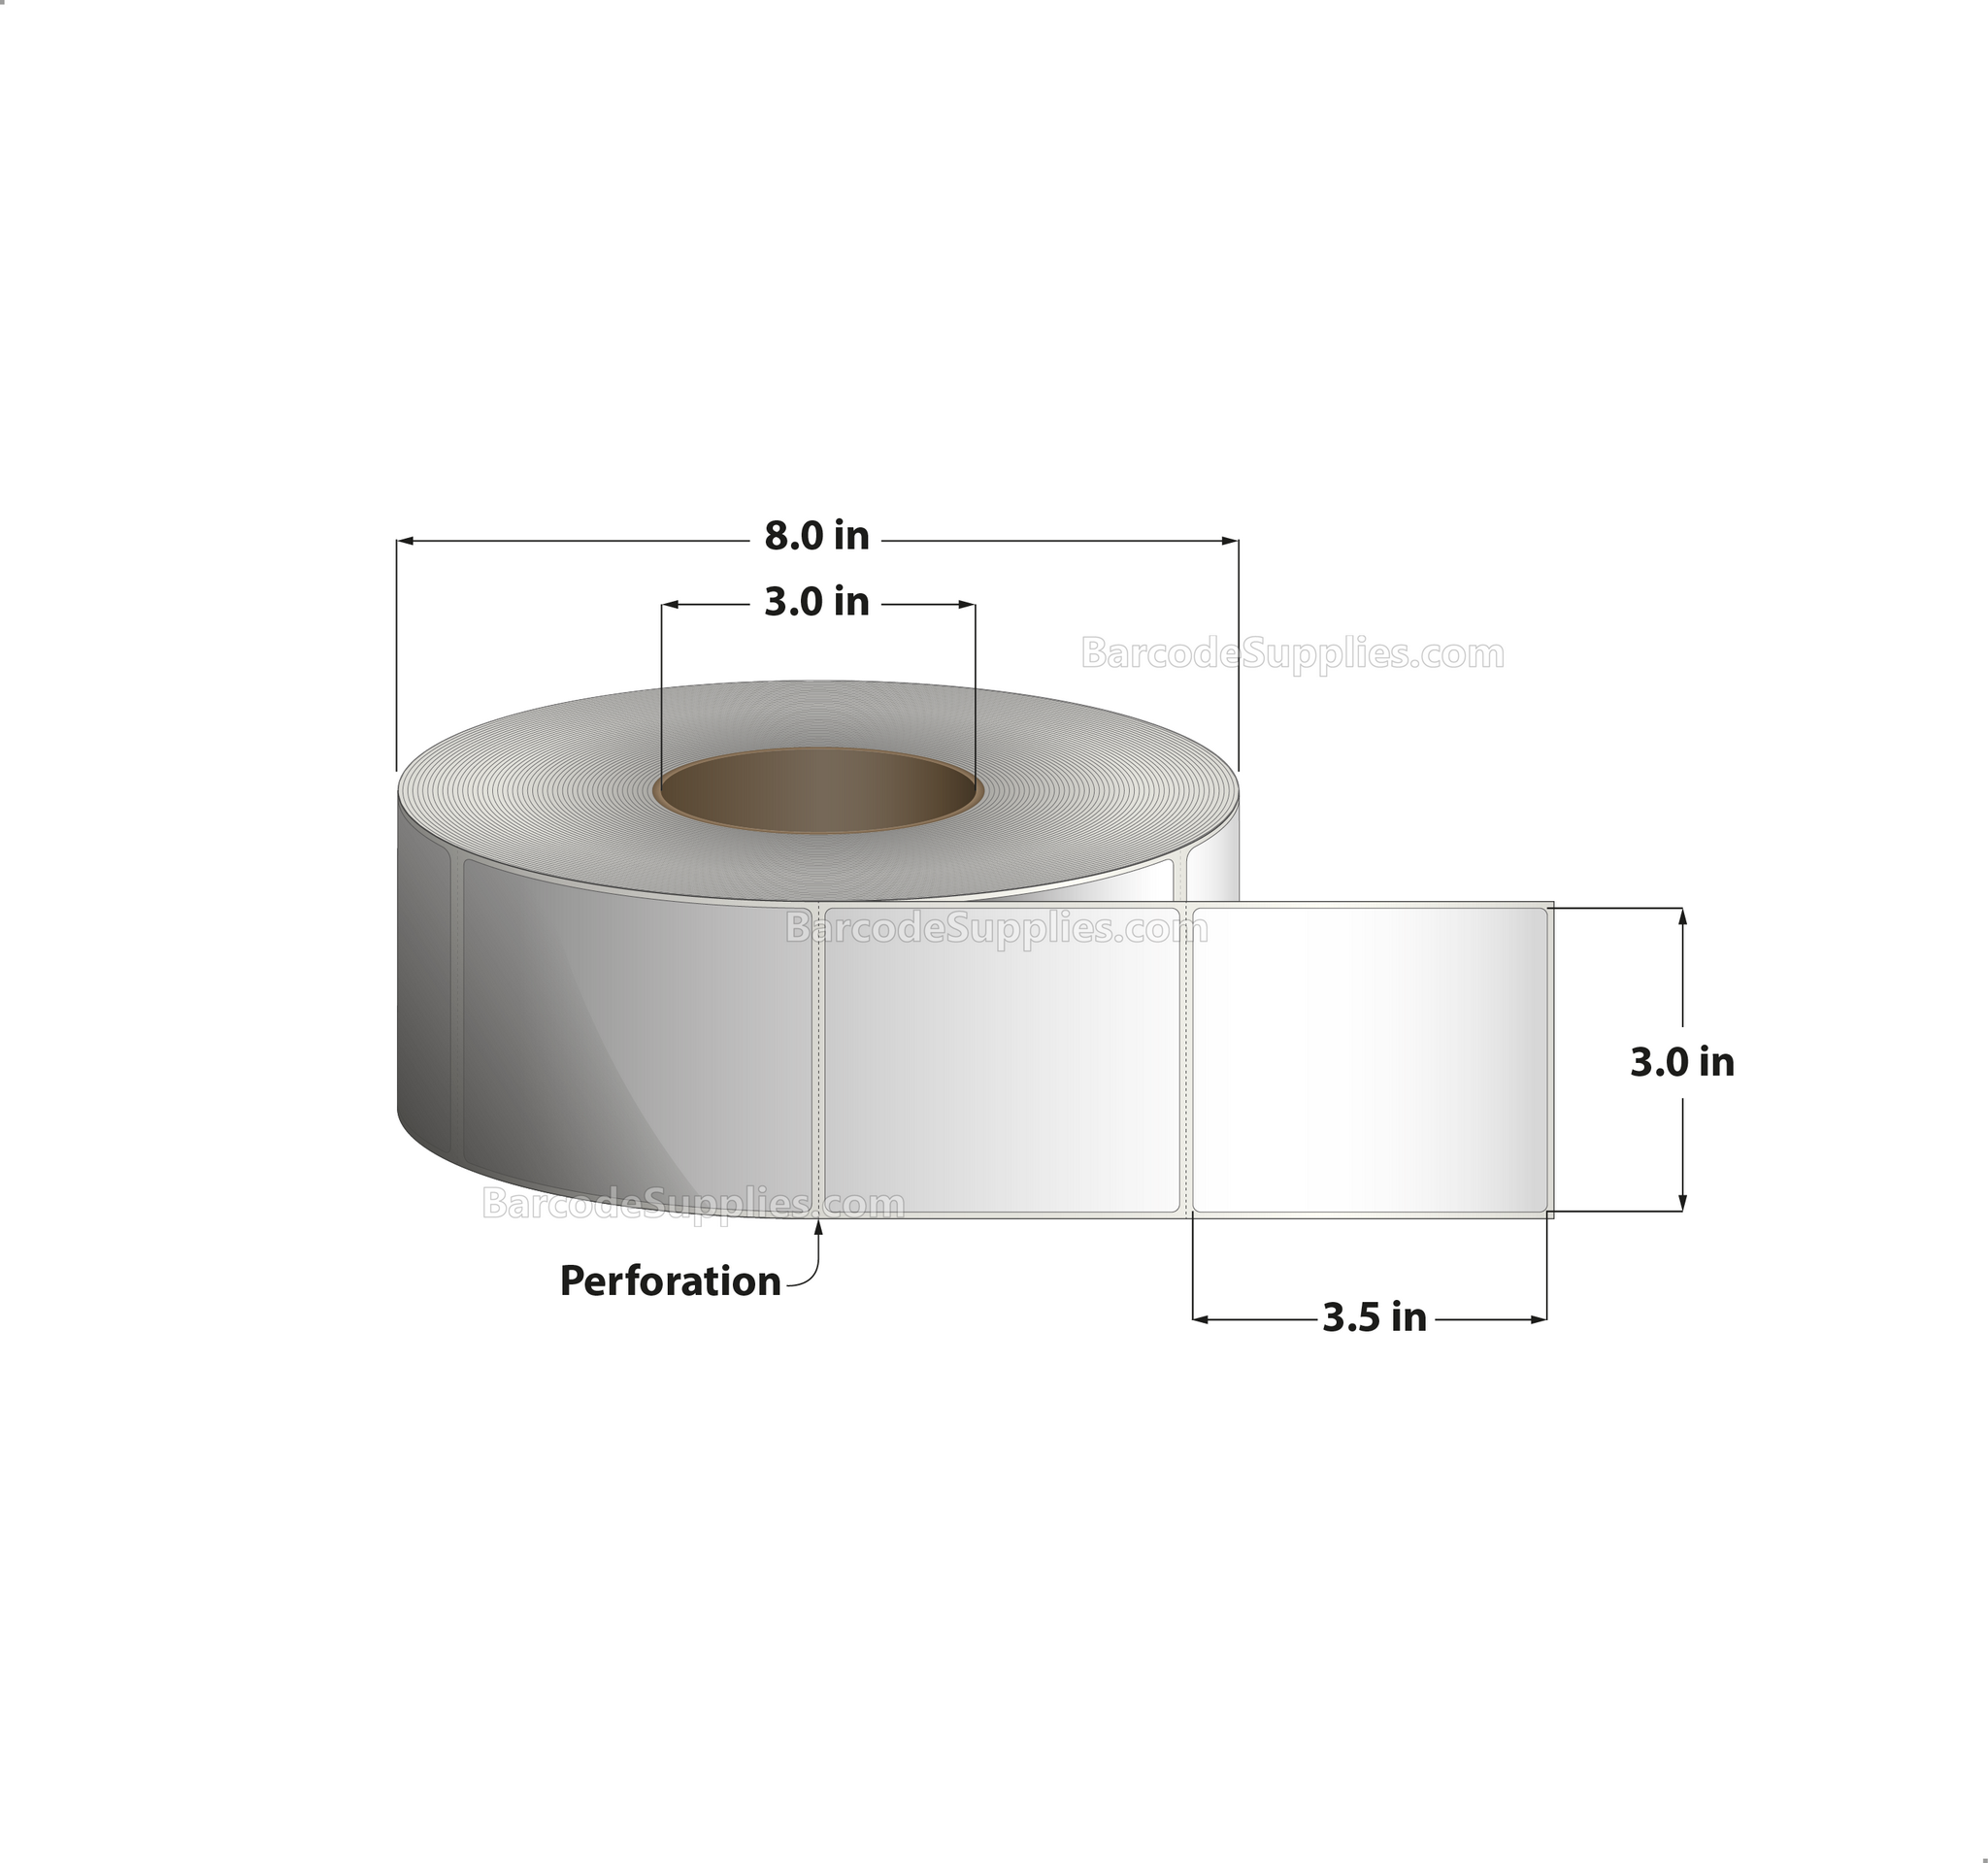 3 x 3.5 Thermal Transfer White Labels With Permanent Adhesive - Perforated - 1700 Labels Per Roll - Carton Of 8 Rolls - 13600 Labels Total - MPN: RT-3-35-1700-3